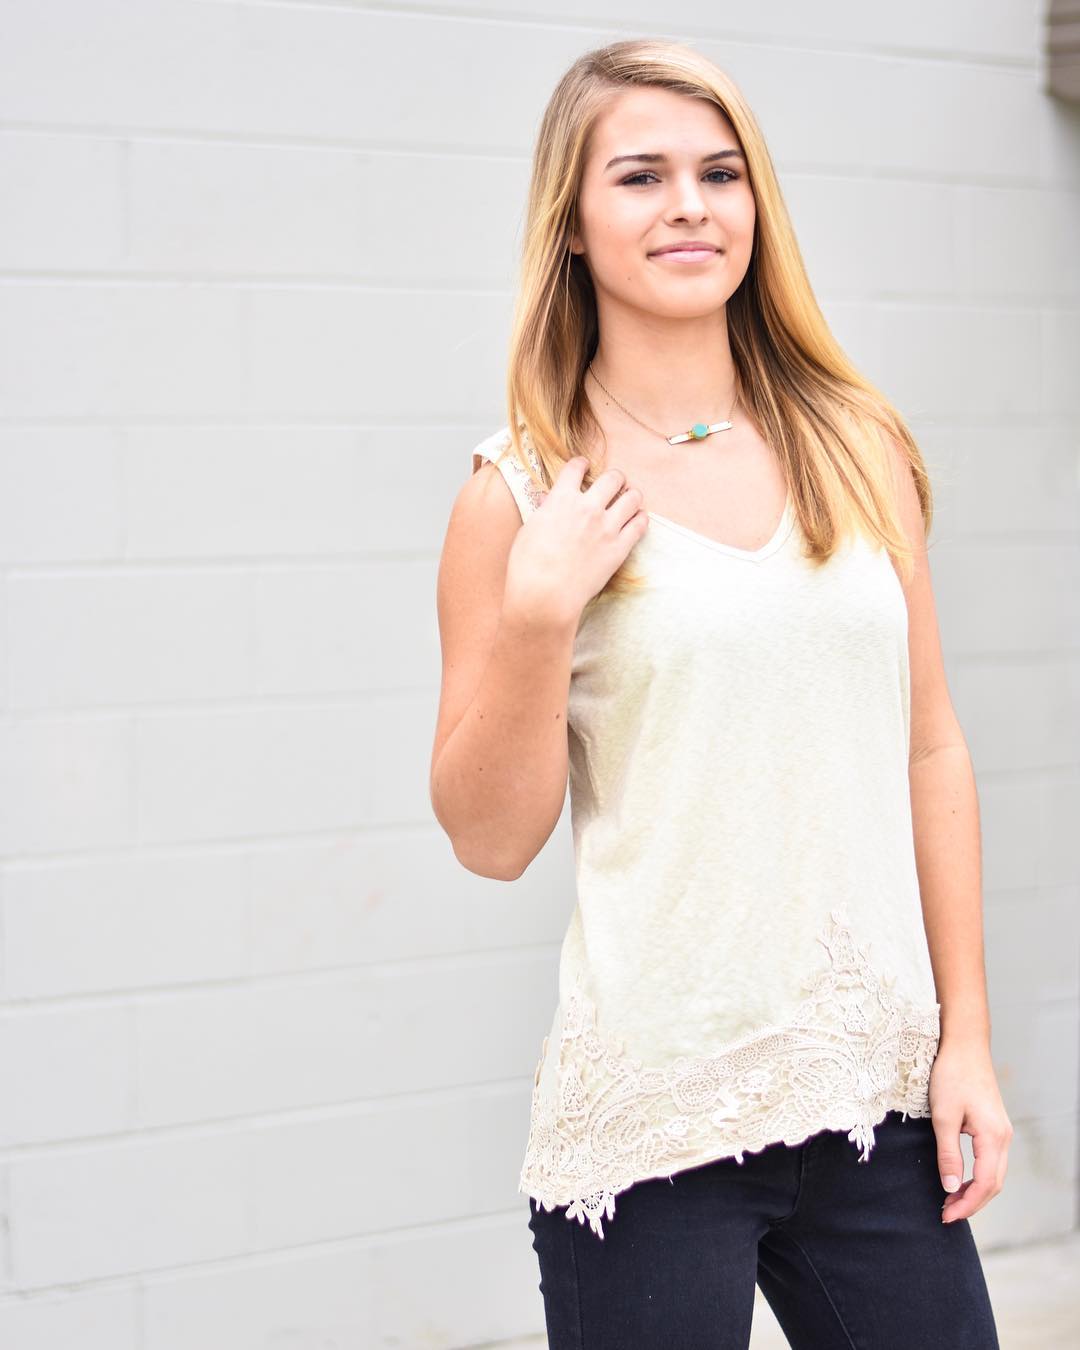 Lace embroidered and cream colored tops